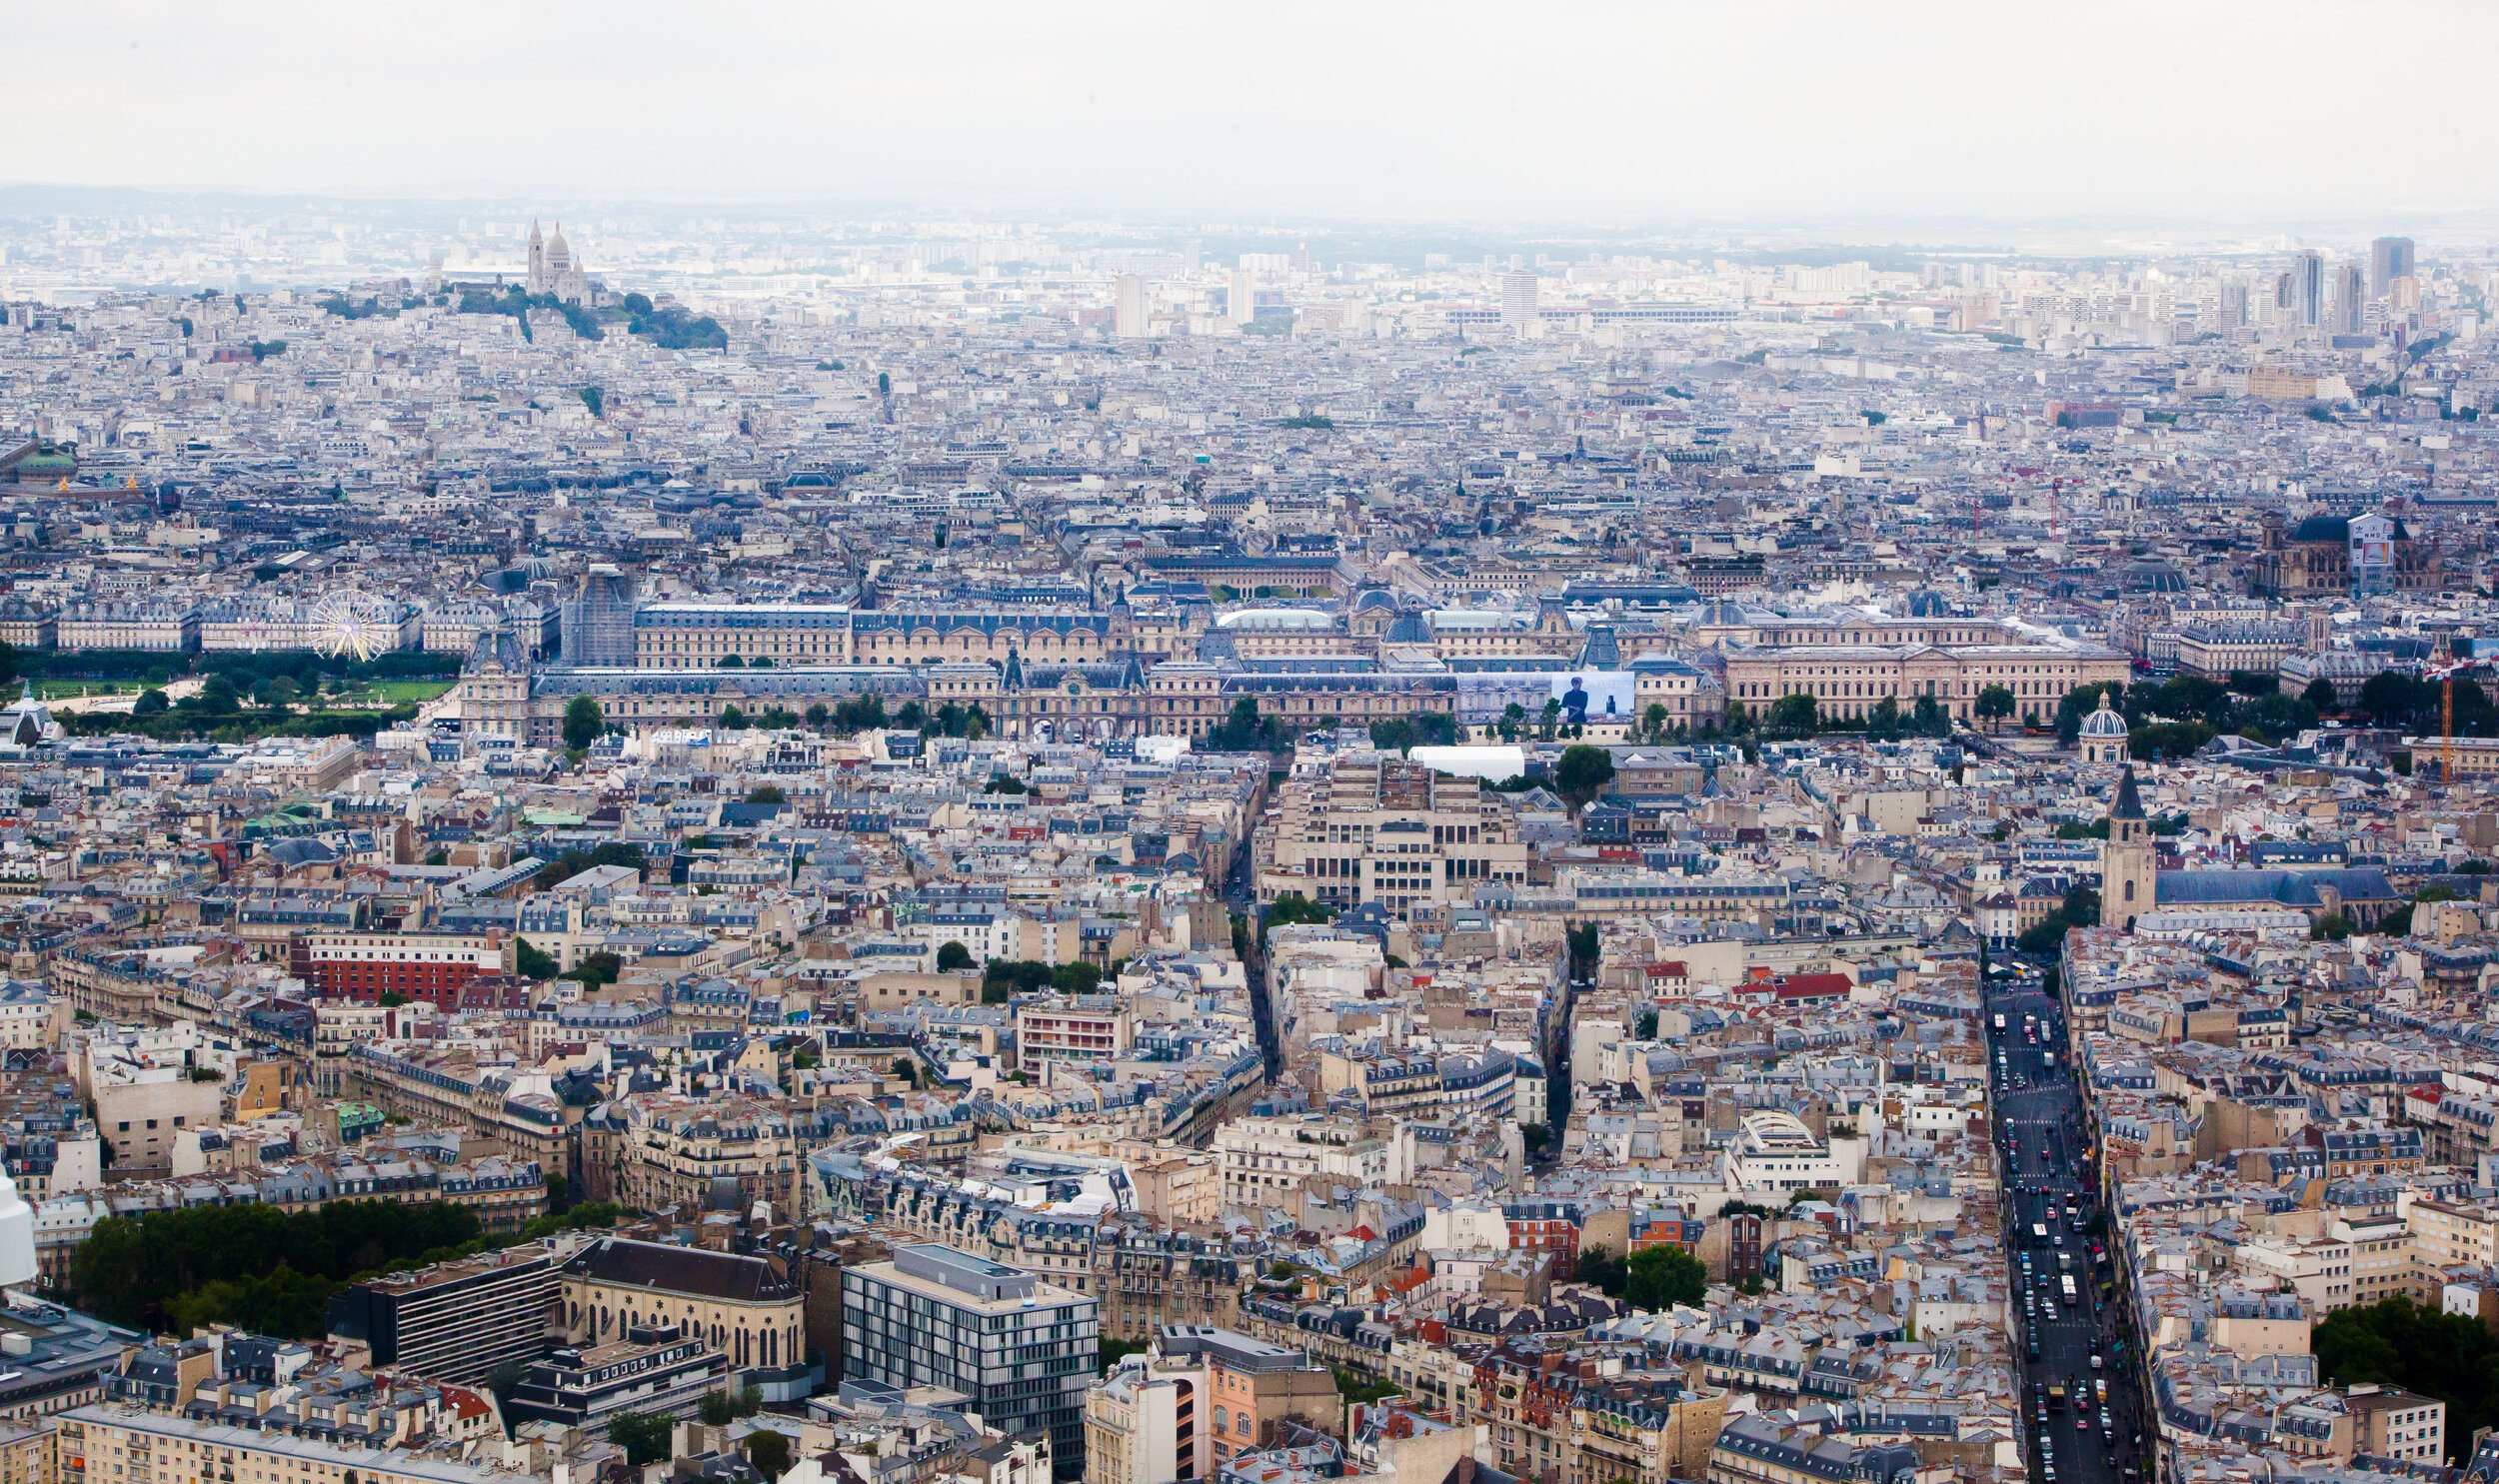 View of Paris, including the Louvre and Sacre Coeur